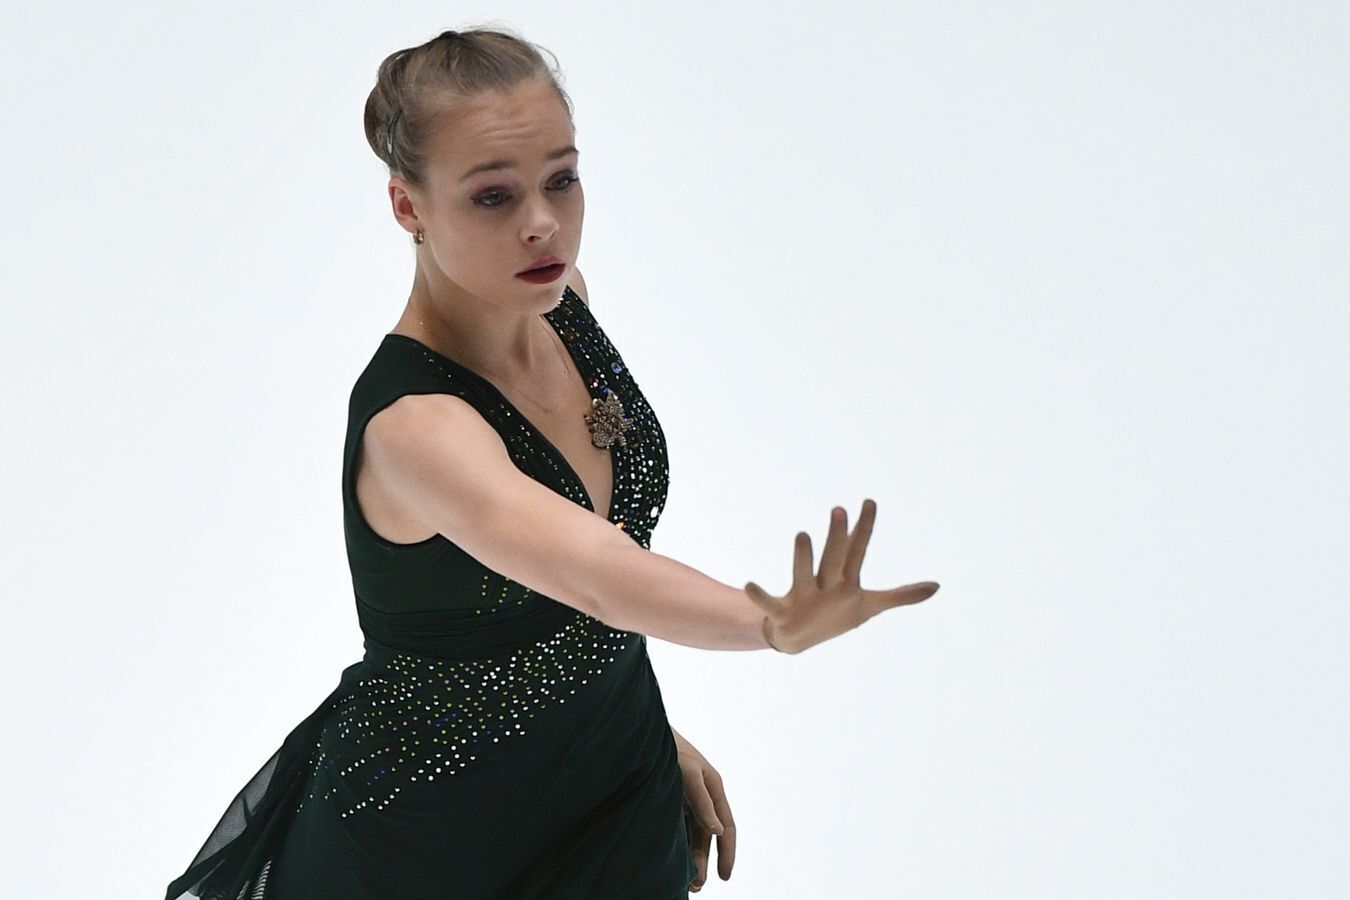 ''Are you stupid?'' Former world champion from Russia is angry about the European Figure Skating Championships, which supported Ukraine